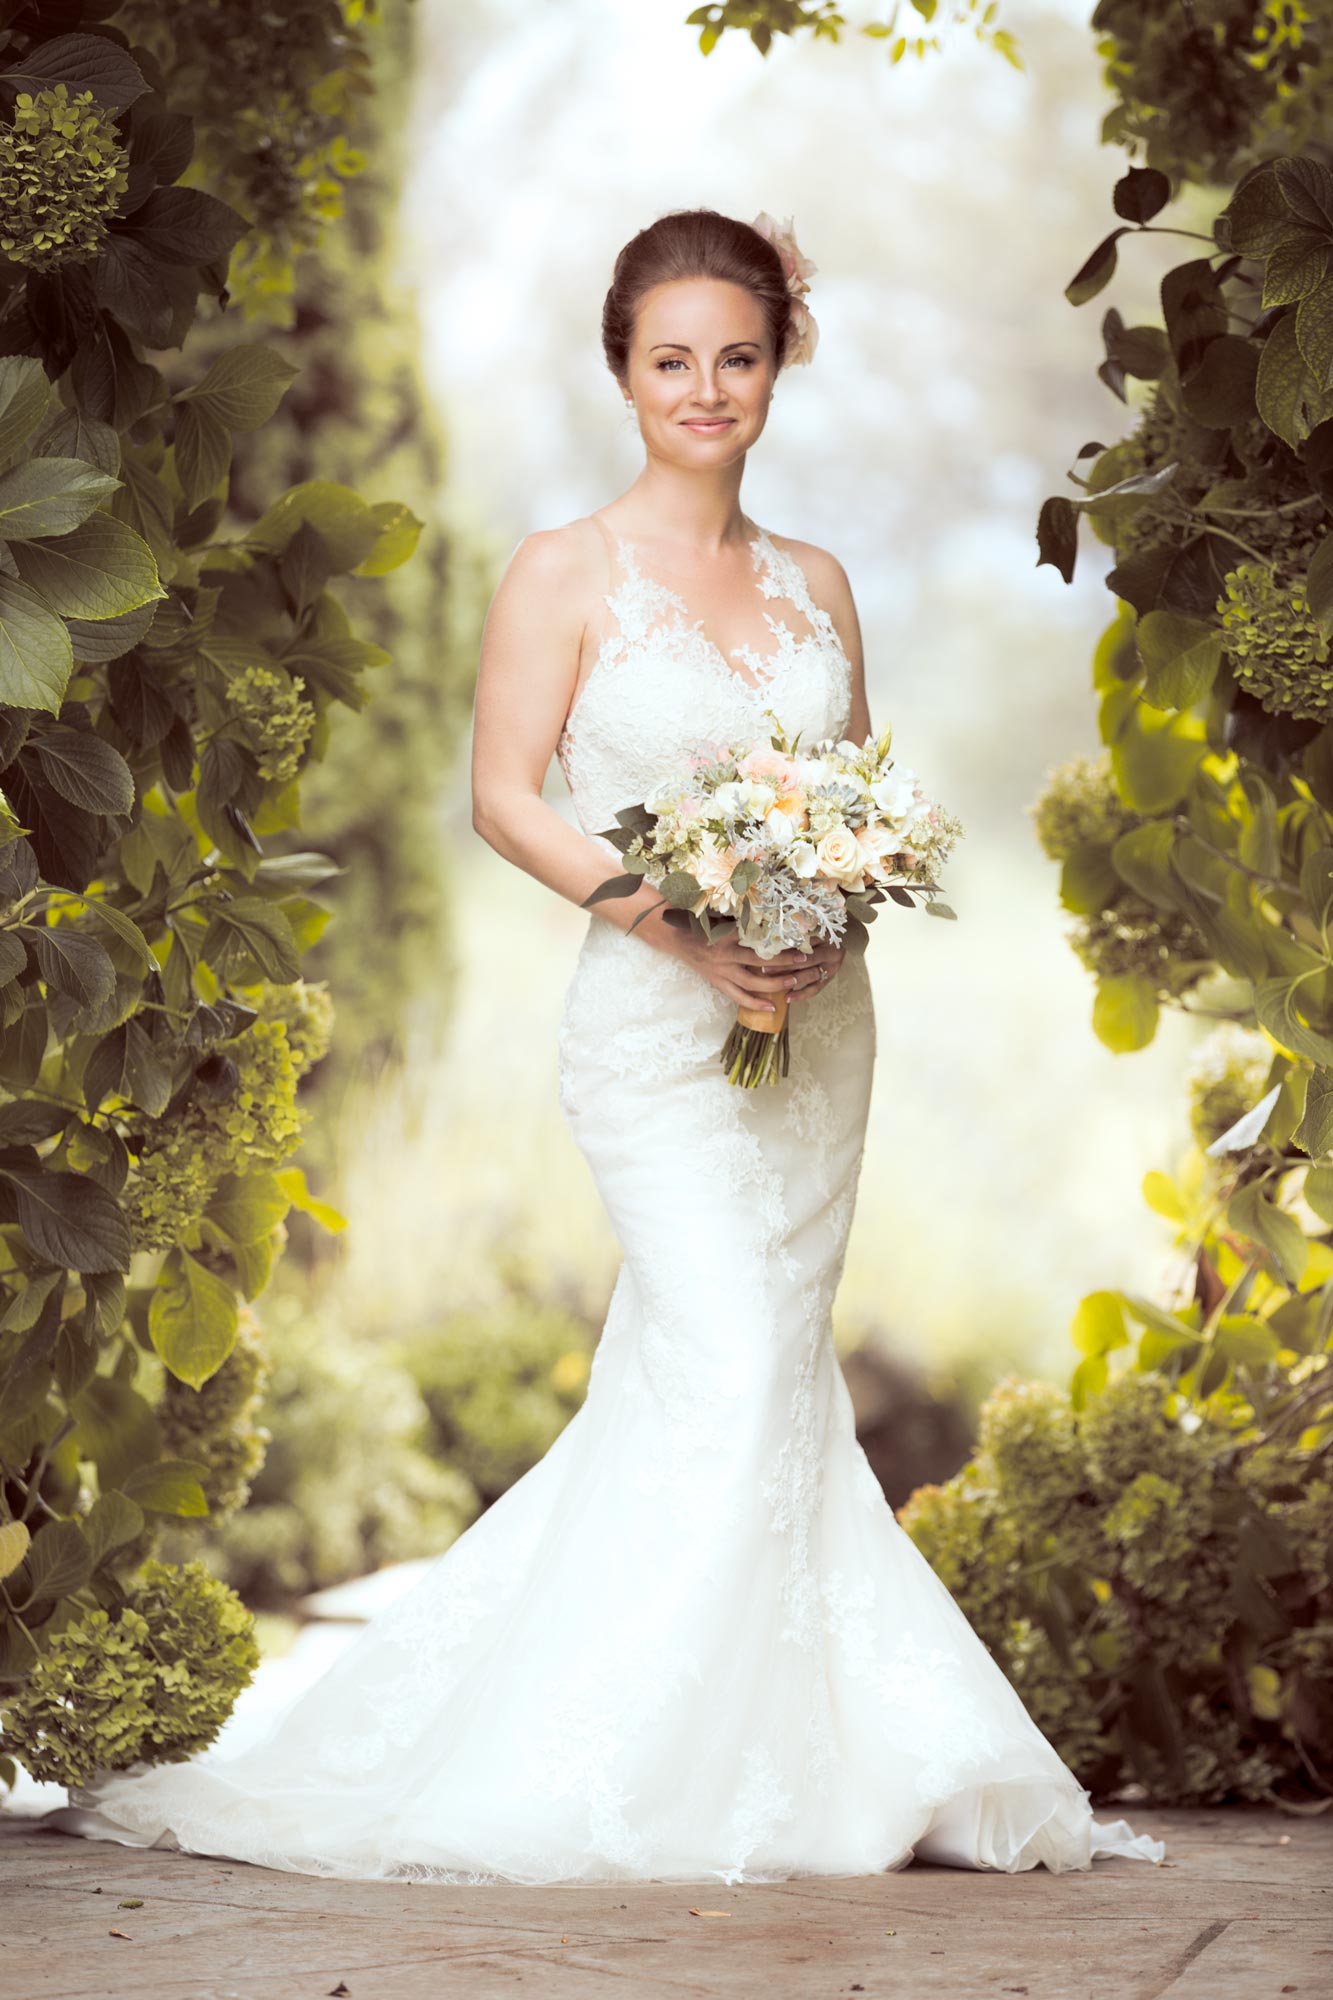 Wedding portrait of a bride in her dress holding a bouquet in a garden